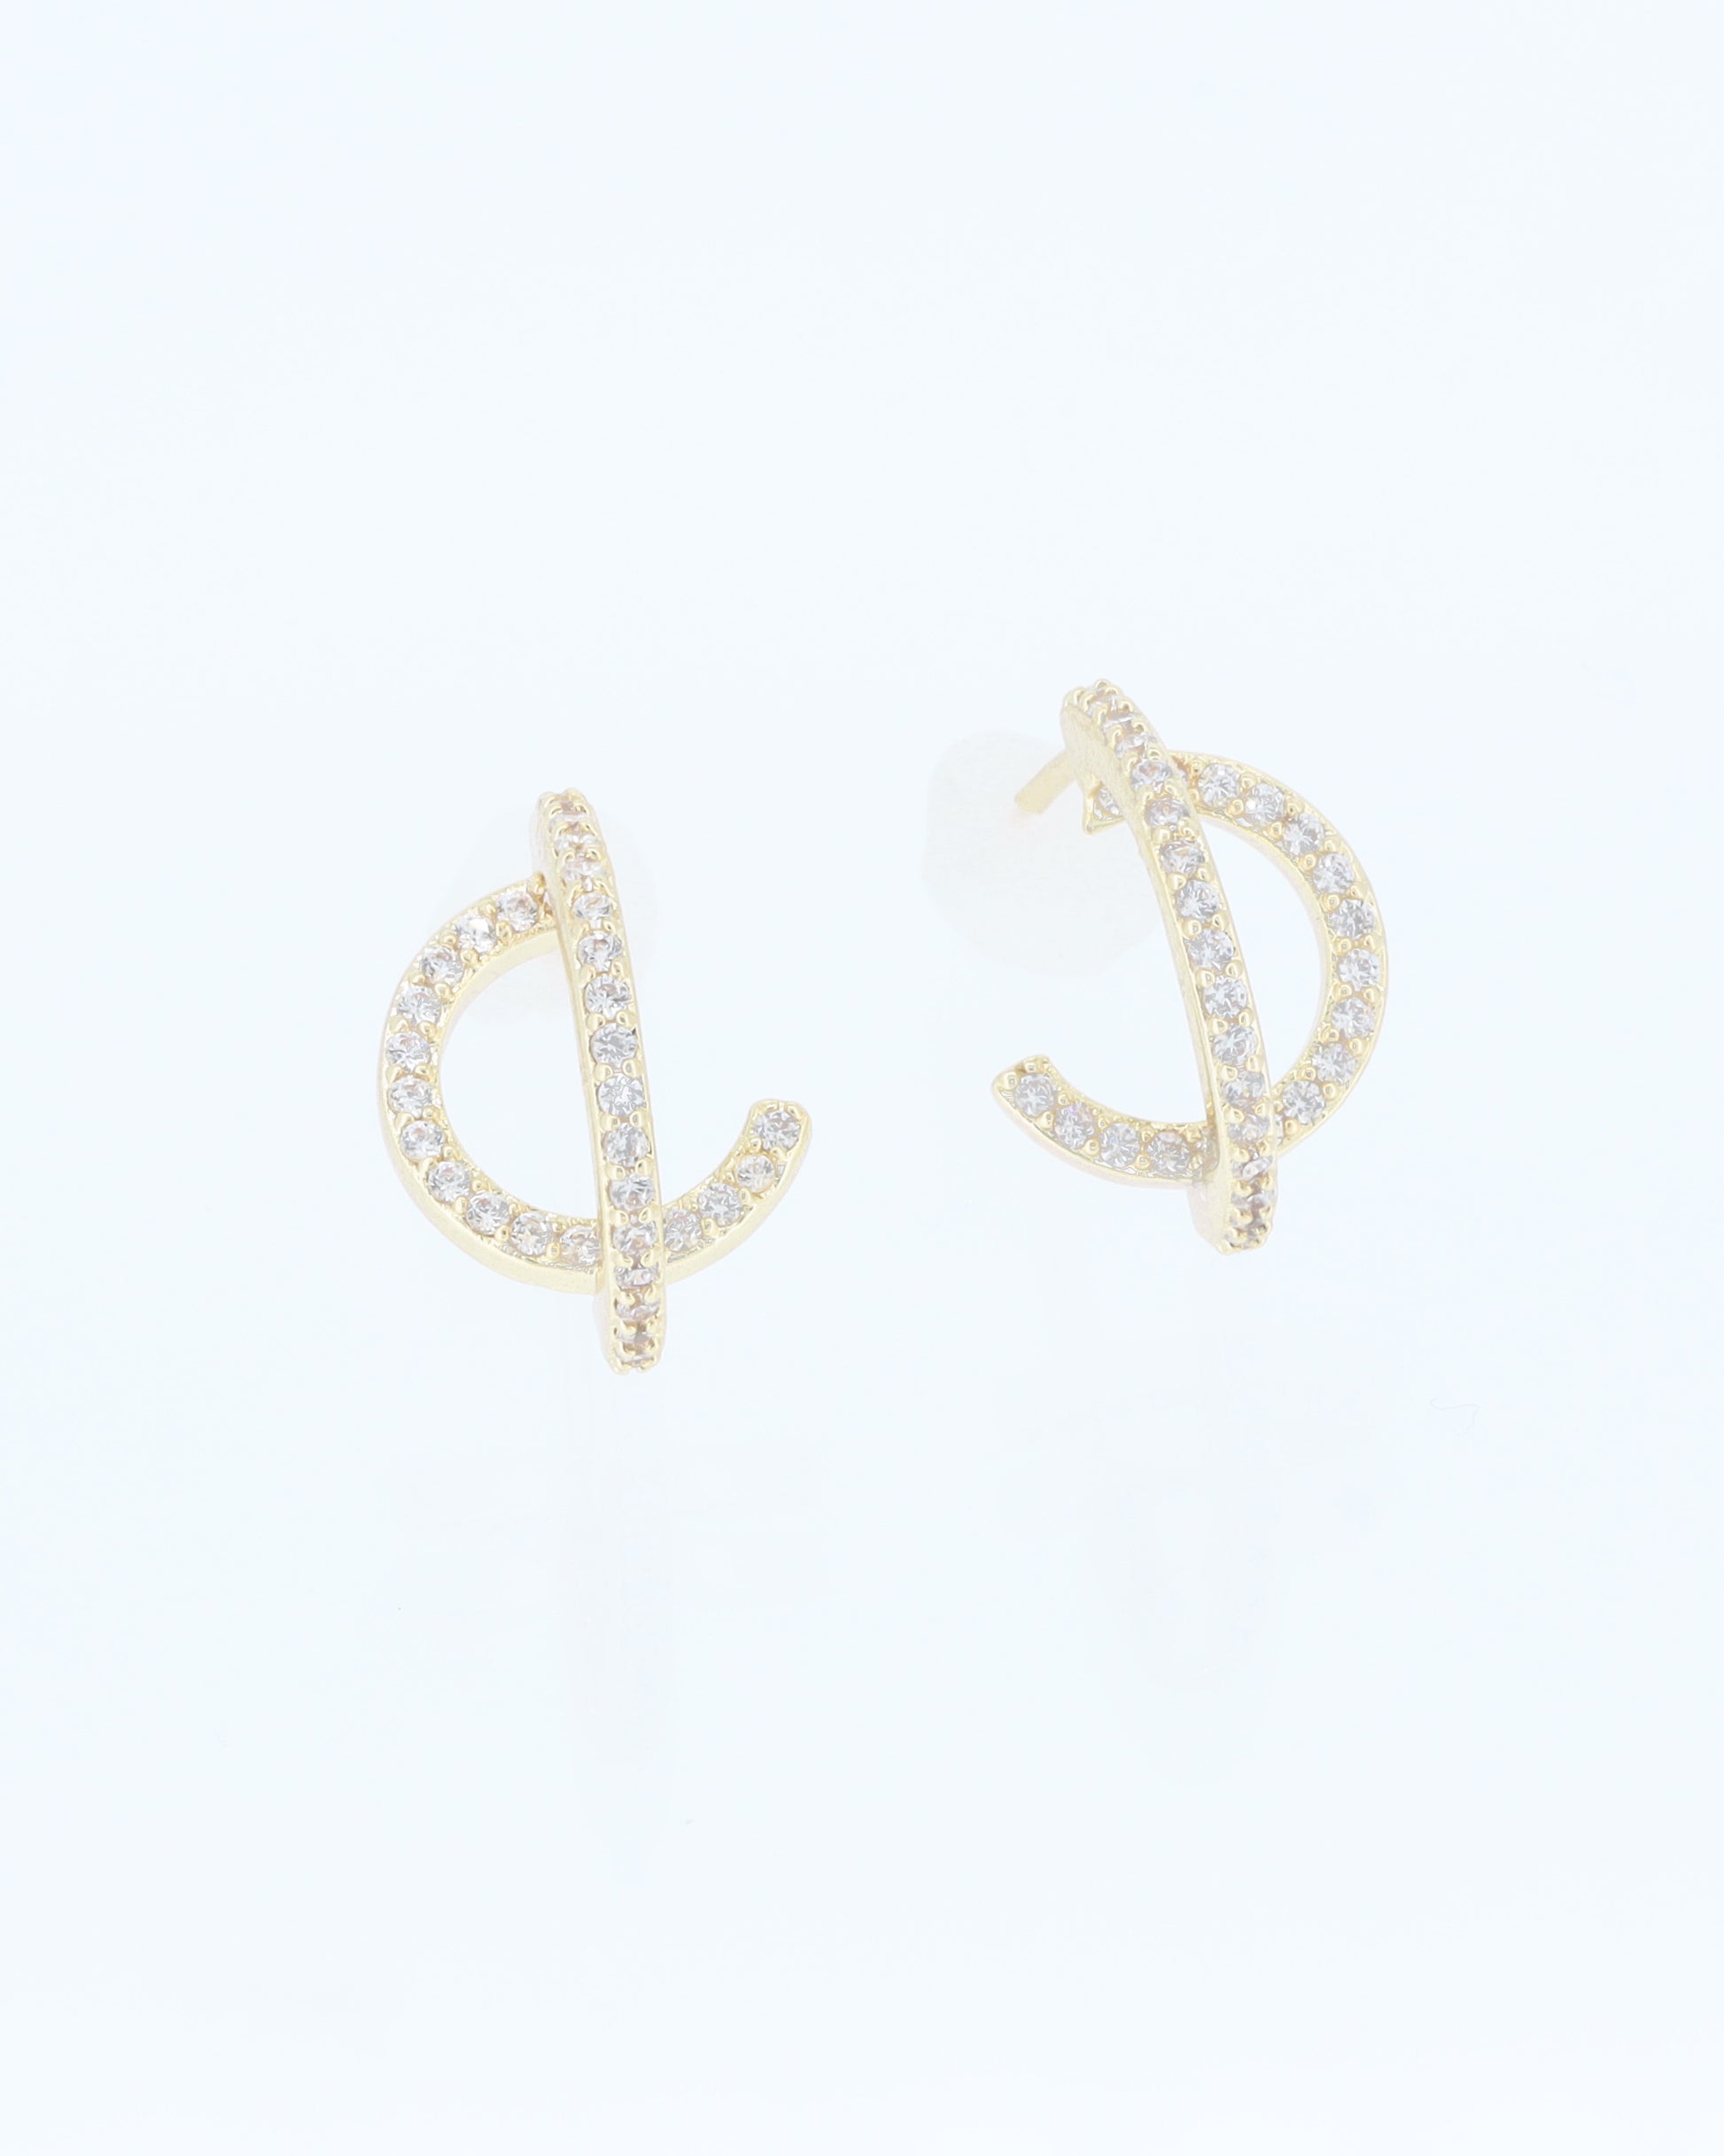 Geometric Design Micro Pave Cubic Zirconia Stud Earrings Gold Color Fashion Jewelry - Anya Collection